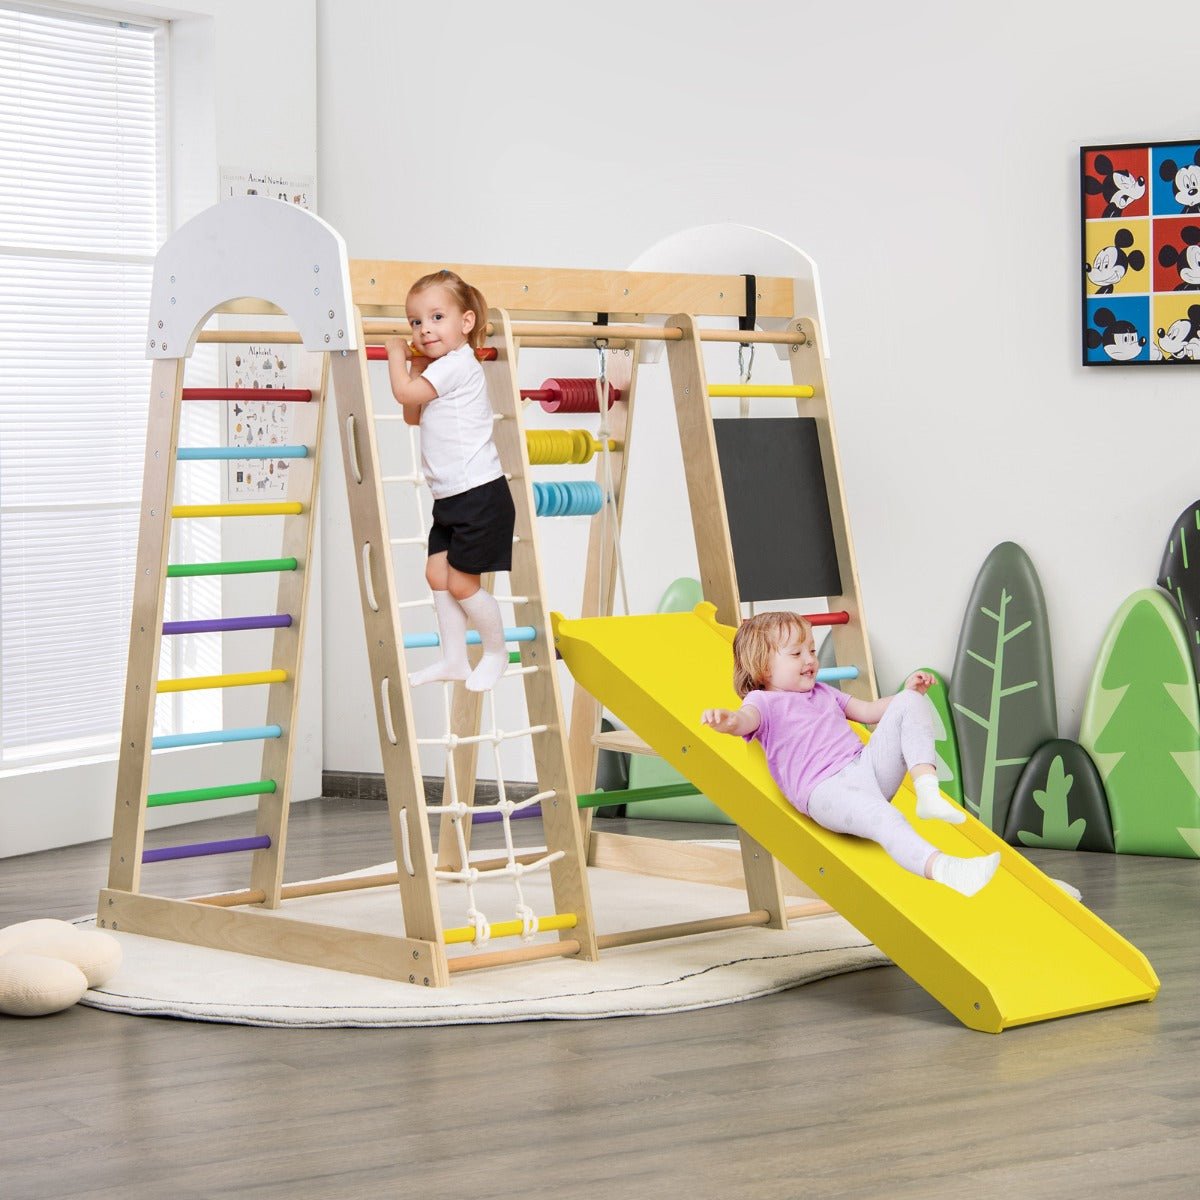 Enhance Creativity with the 8-in-1 Wooden Climbing Playset